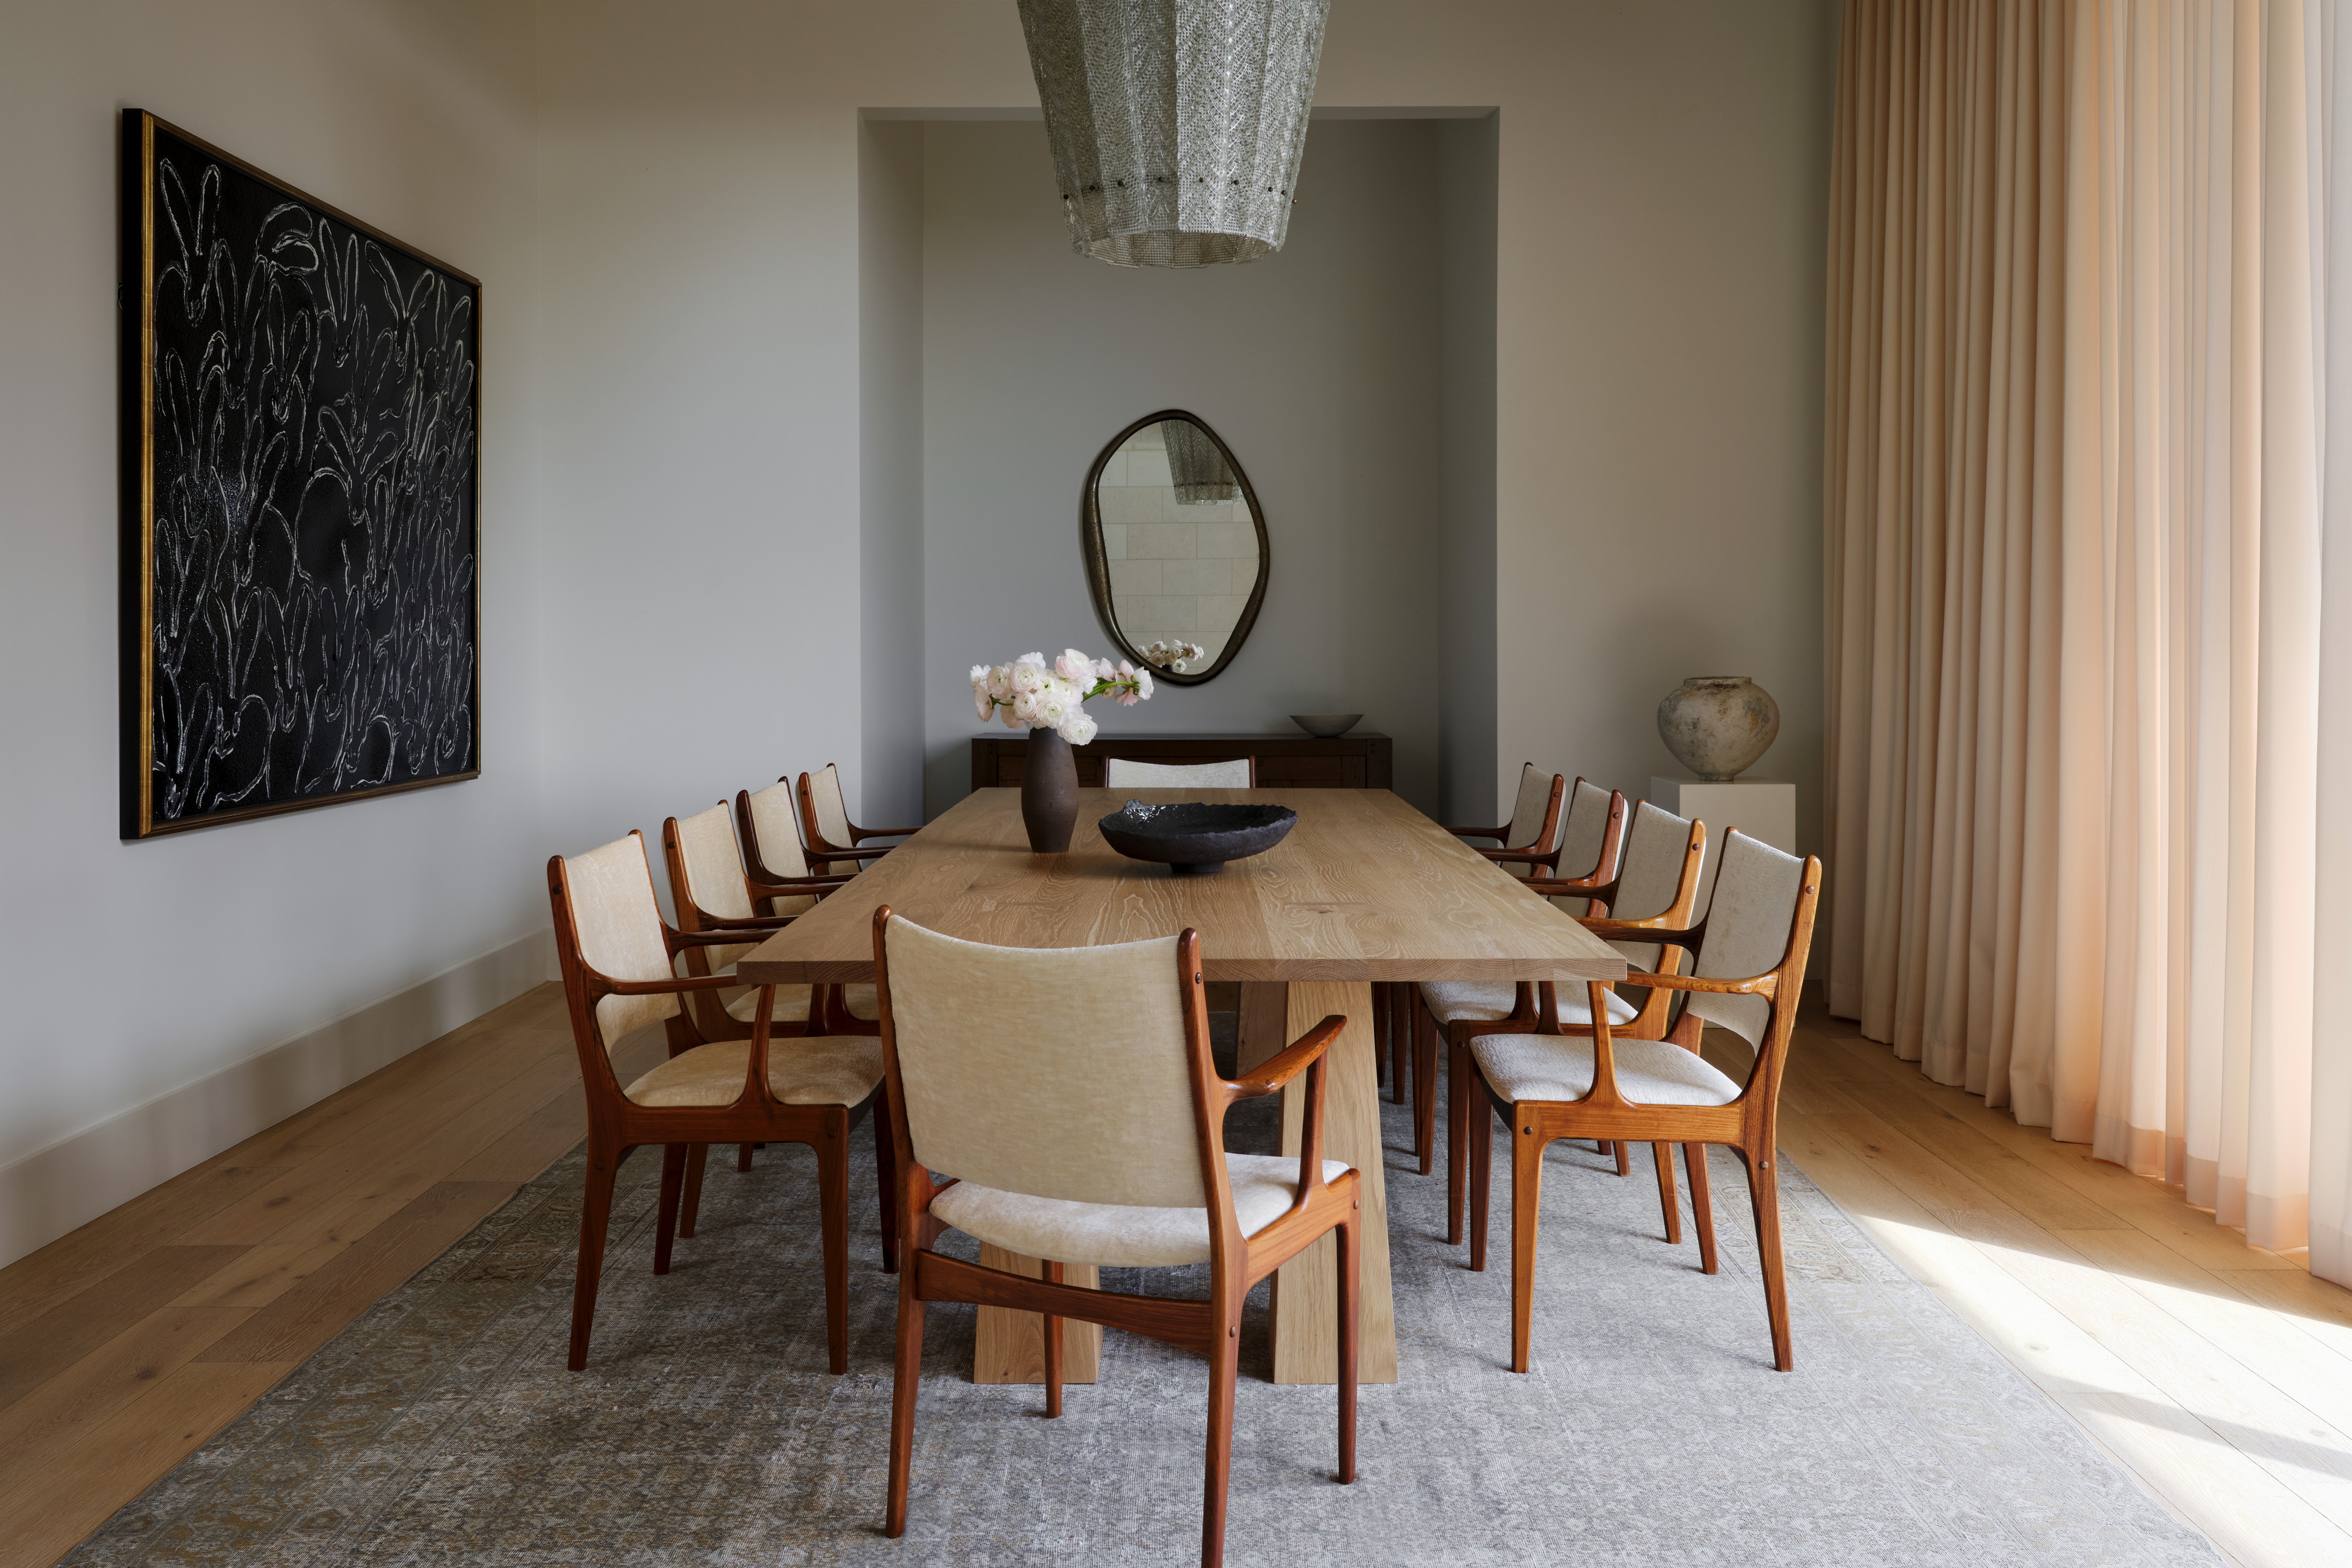 a dining room table with chairs around it